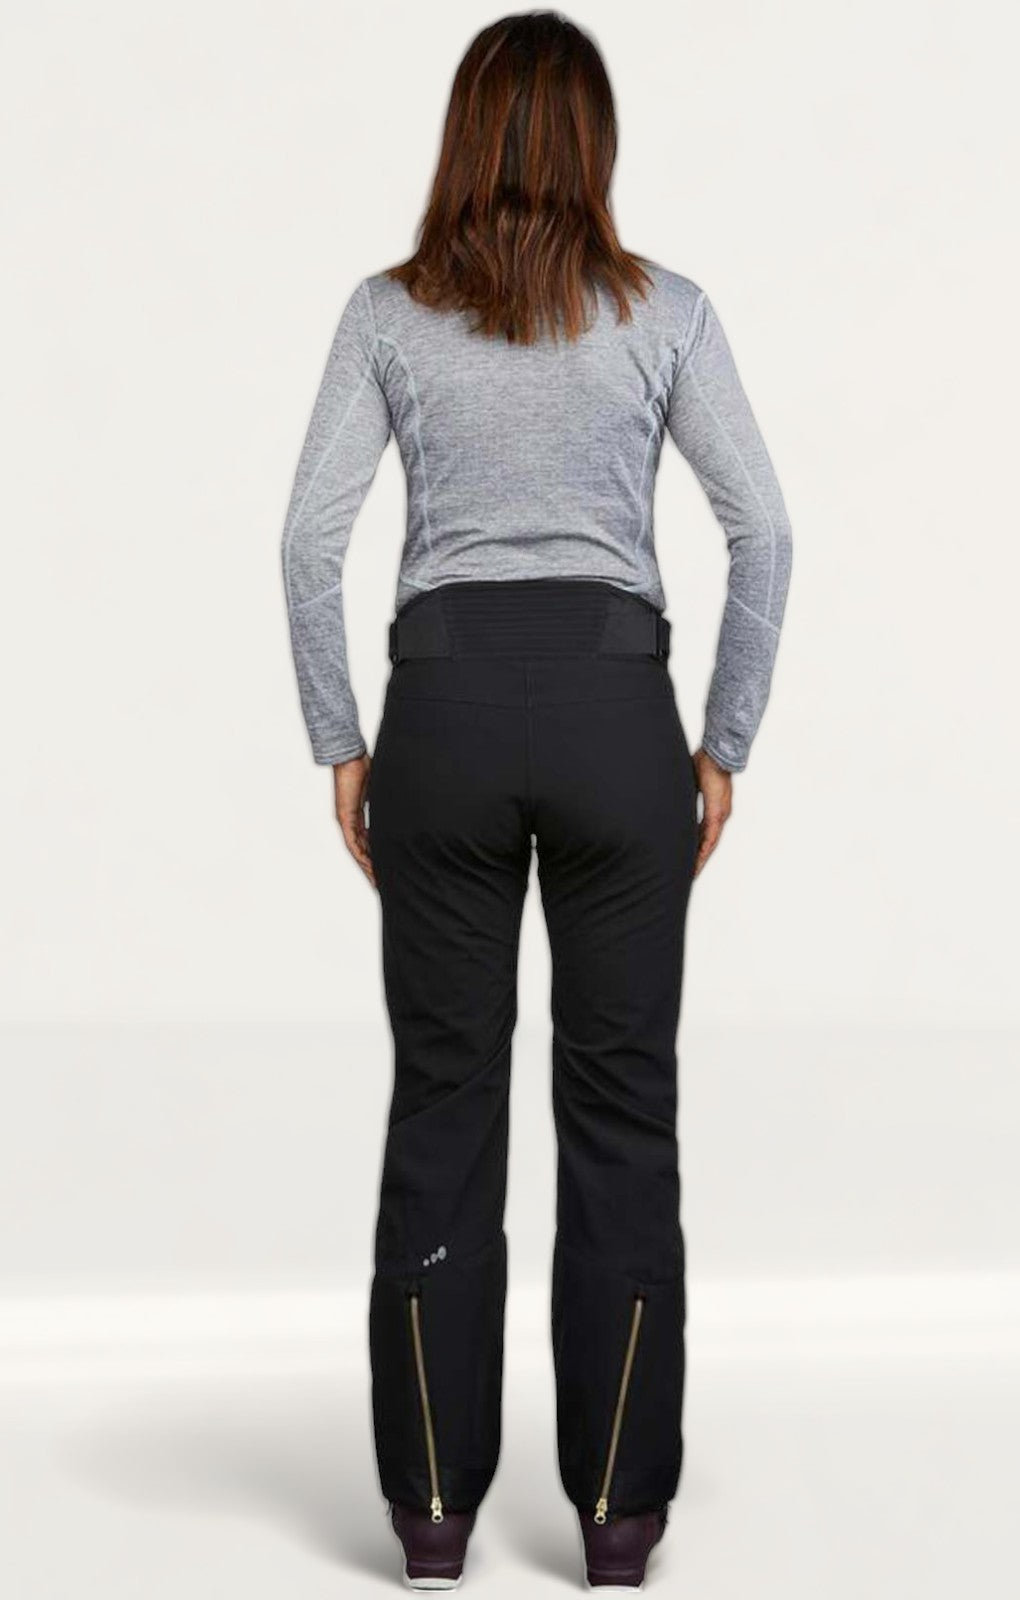 Women's Sports pants from Decathlon, Sports Equipment, Sports & Games,  Water Sports on Carousell